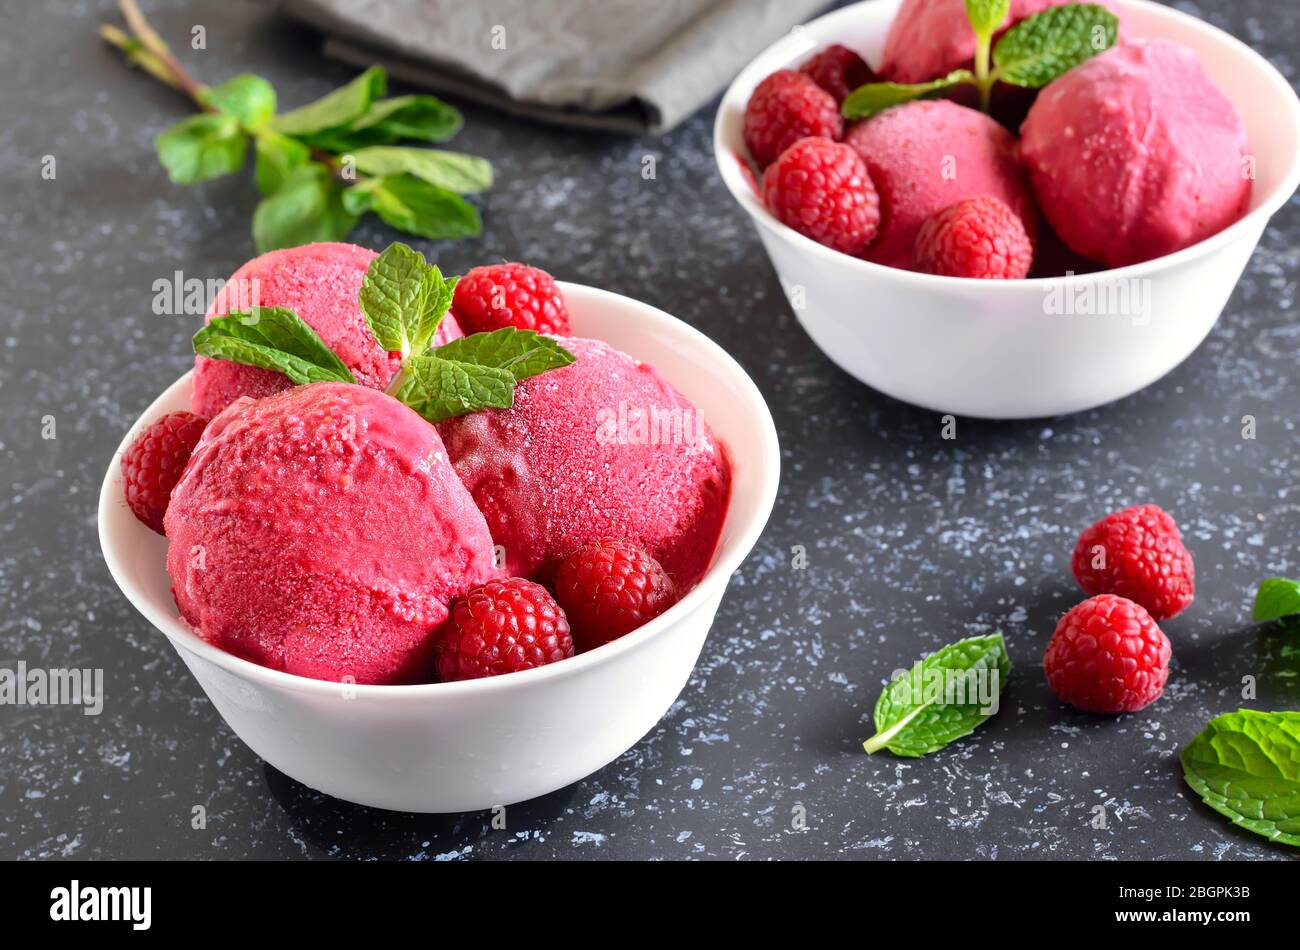 Raspberry ice cream scoop with fresh raspberries in bowl on stone background, close up view Stock Photo